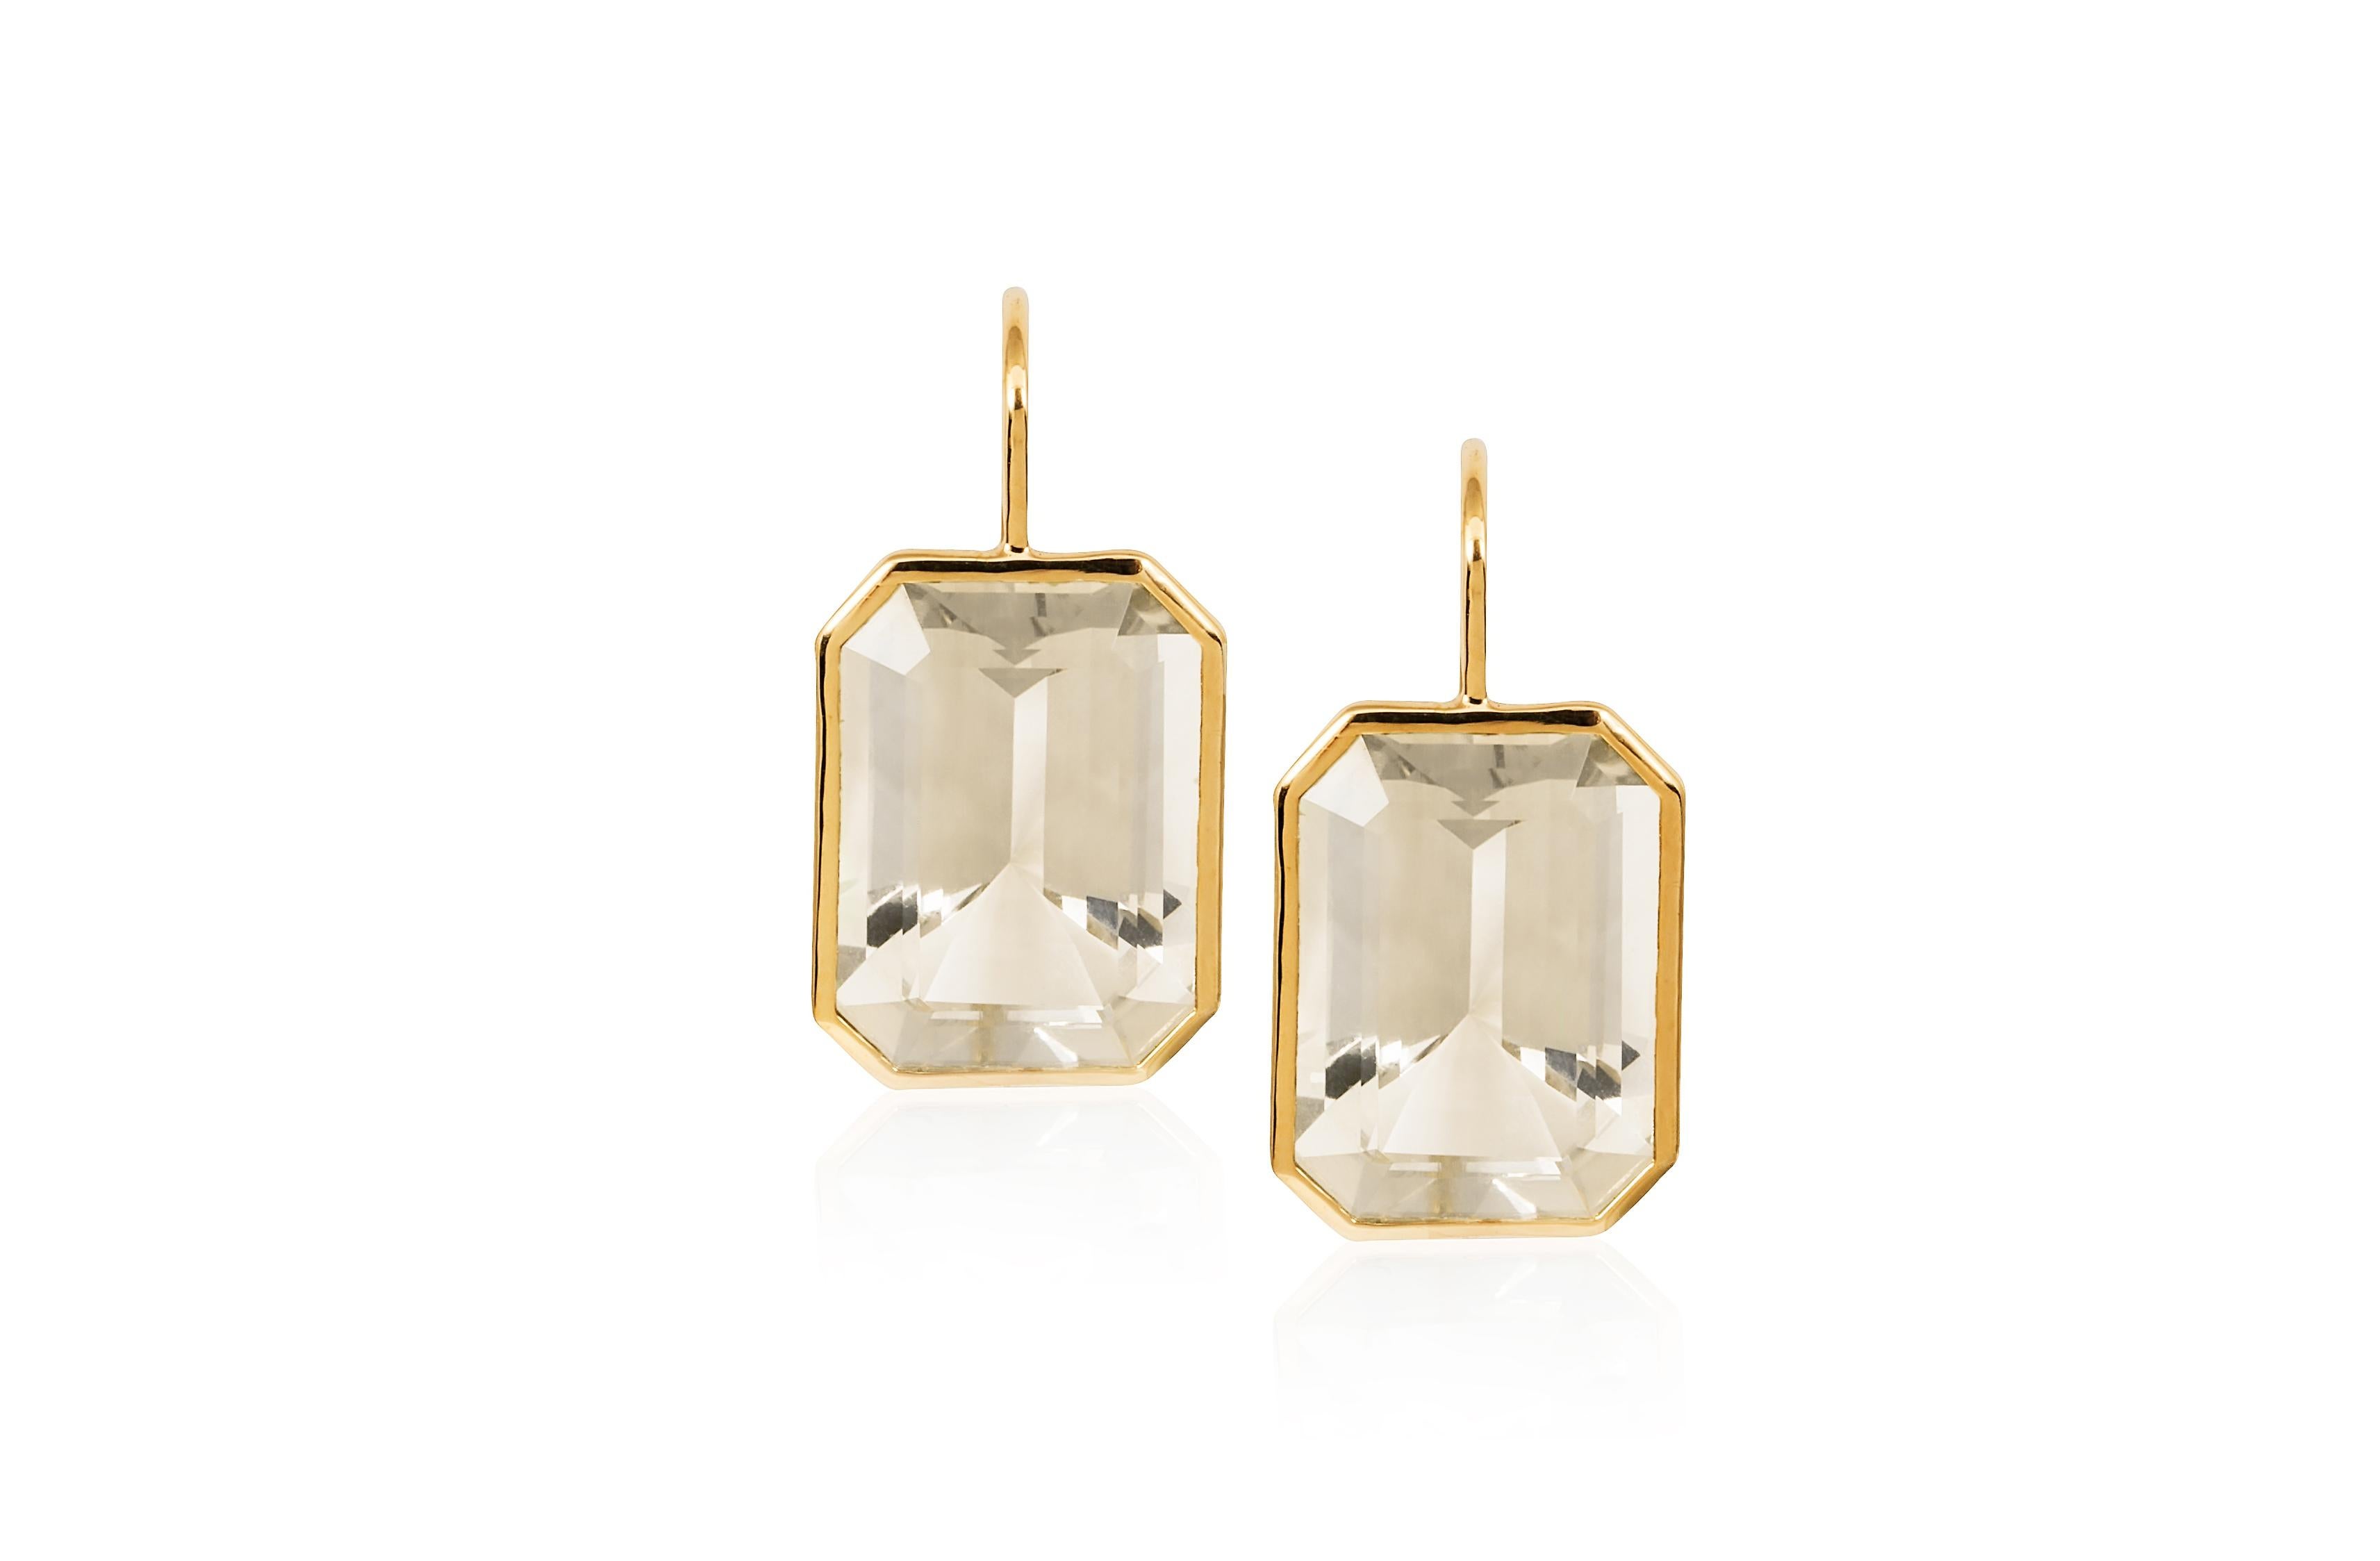 Moon Quartz Emerald Cut Earrings on Wire in 18K Yellow Gold from 'Gossip' Collection

Stone Size: 15 x 10 mm